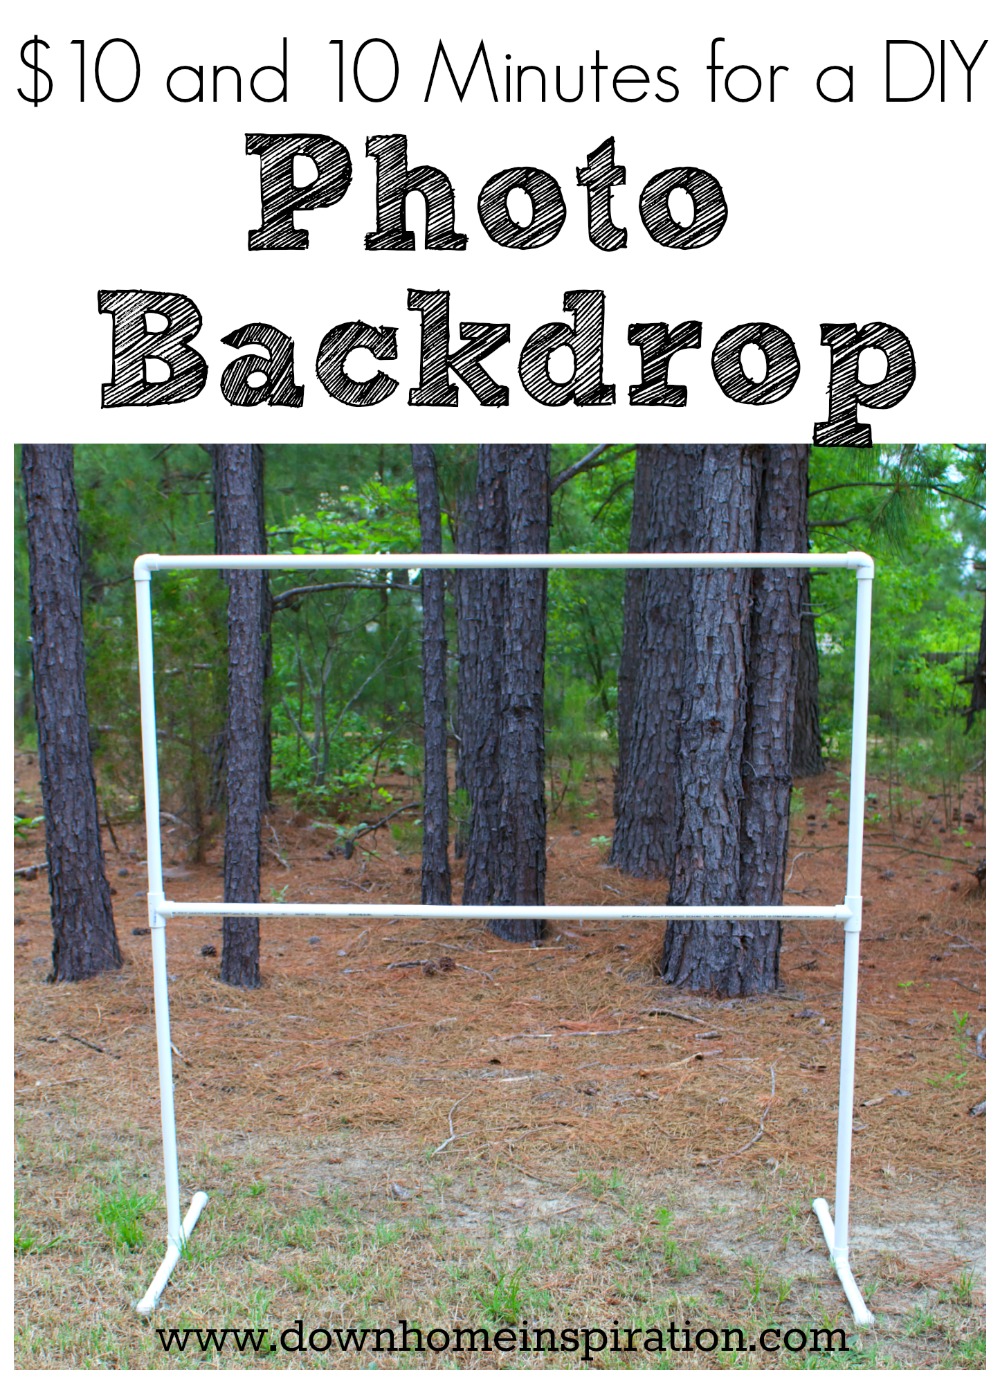 diy backdrops for photography